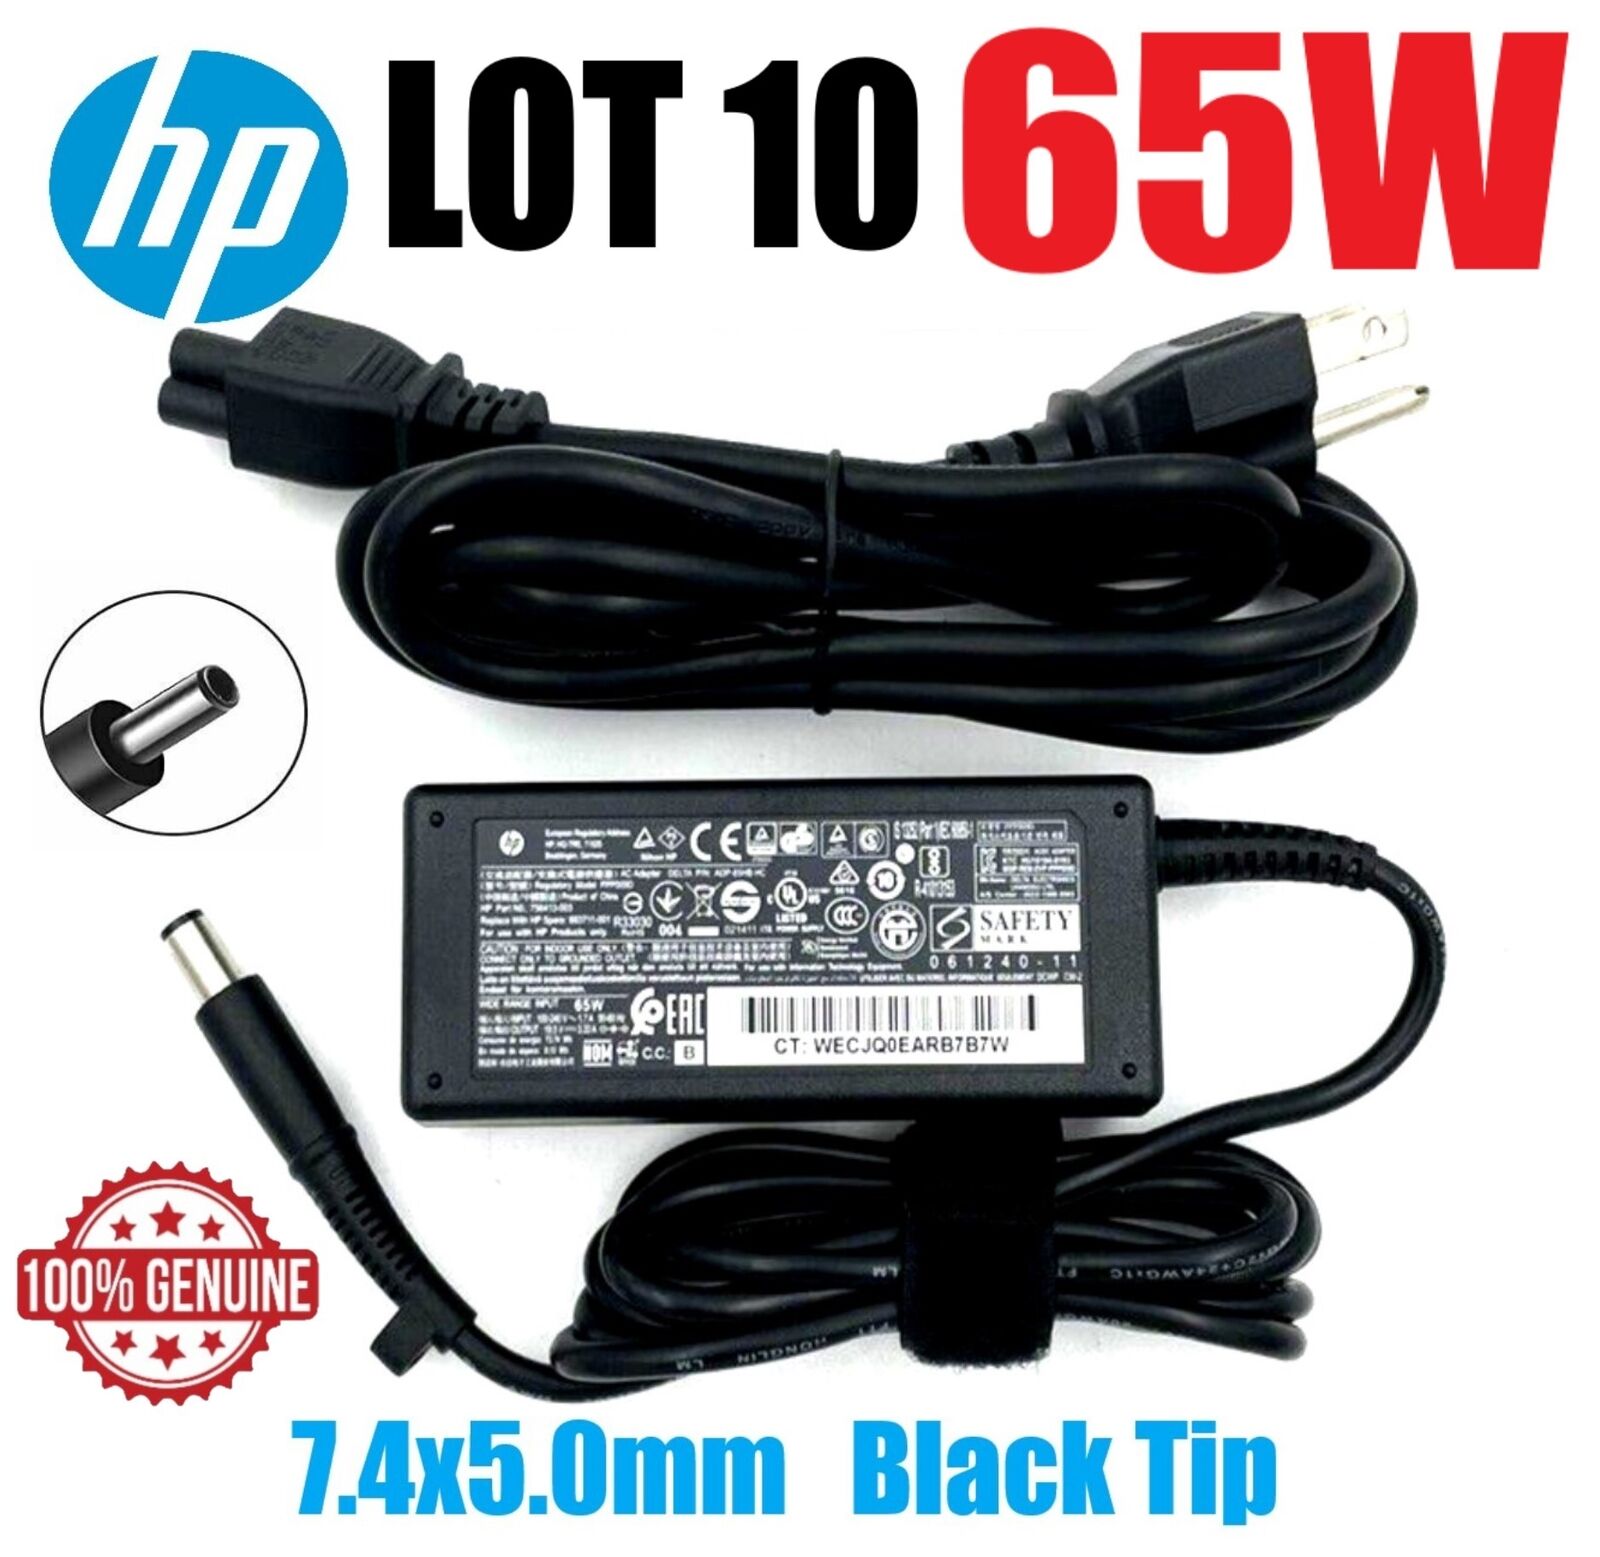 LOT 10 Genuine HP ProDesk 400 600 G1 G2 G3 65W AC Adapter Power Charger 7.4x5mm